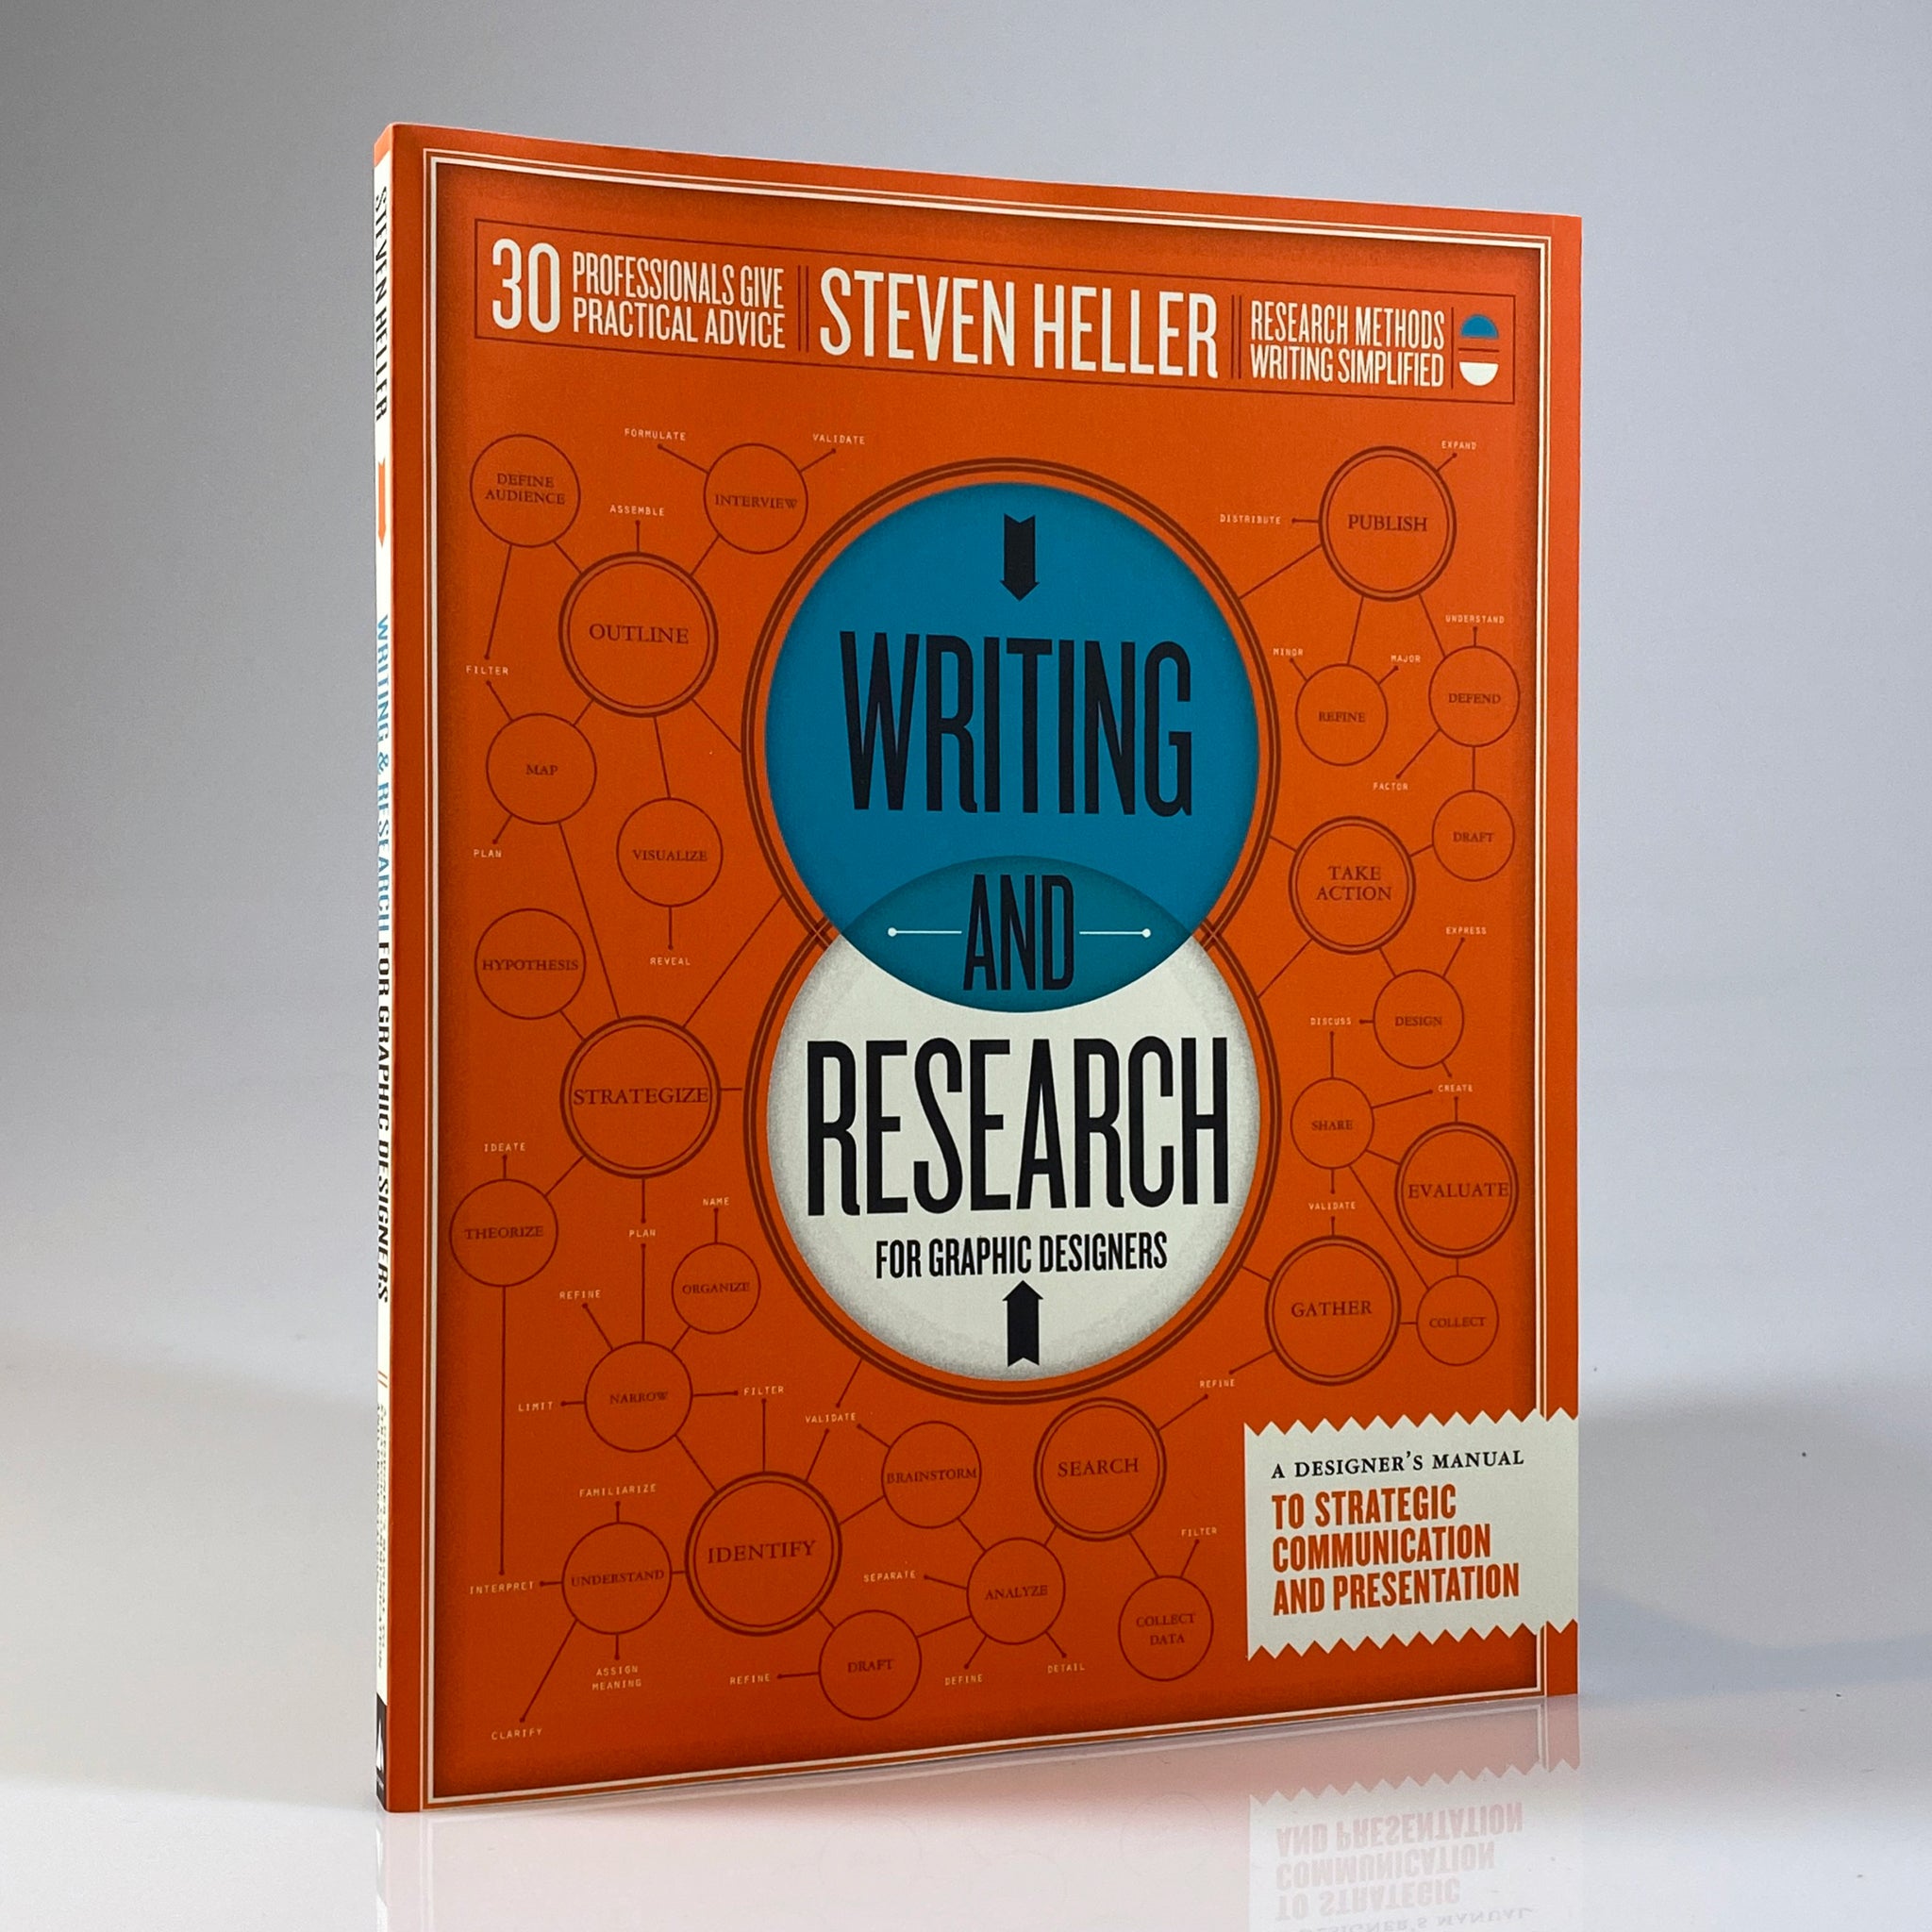 Writing and Research for Graphic Designers